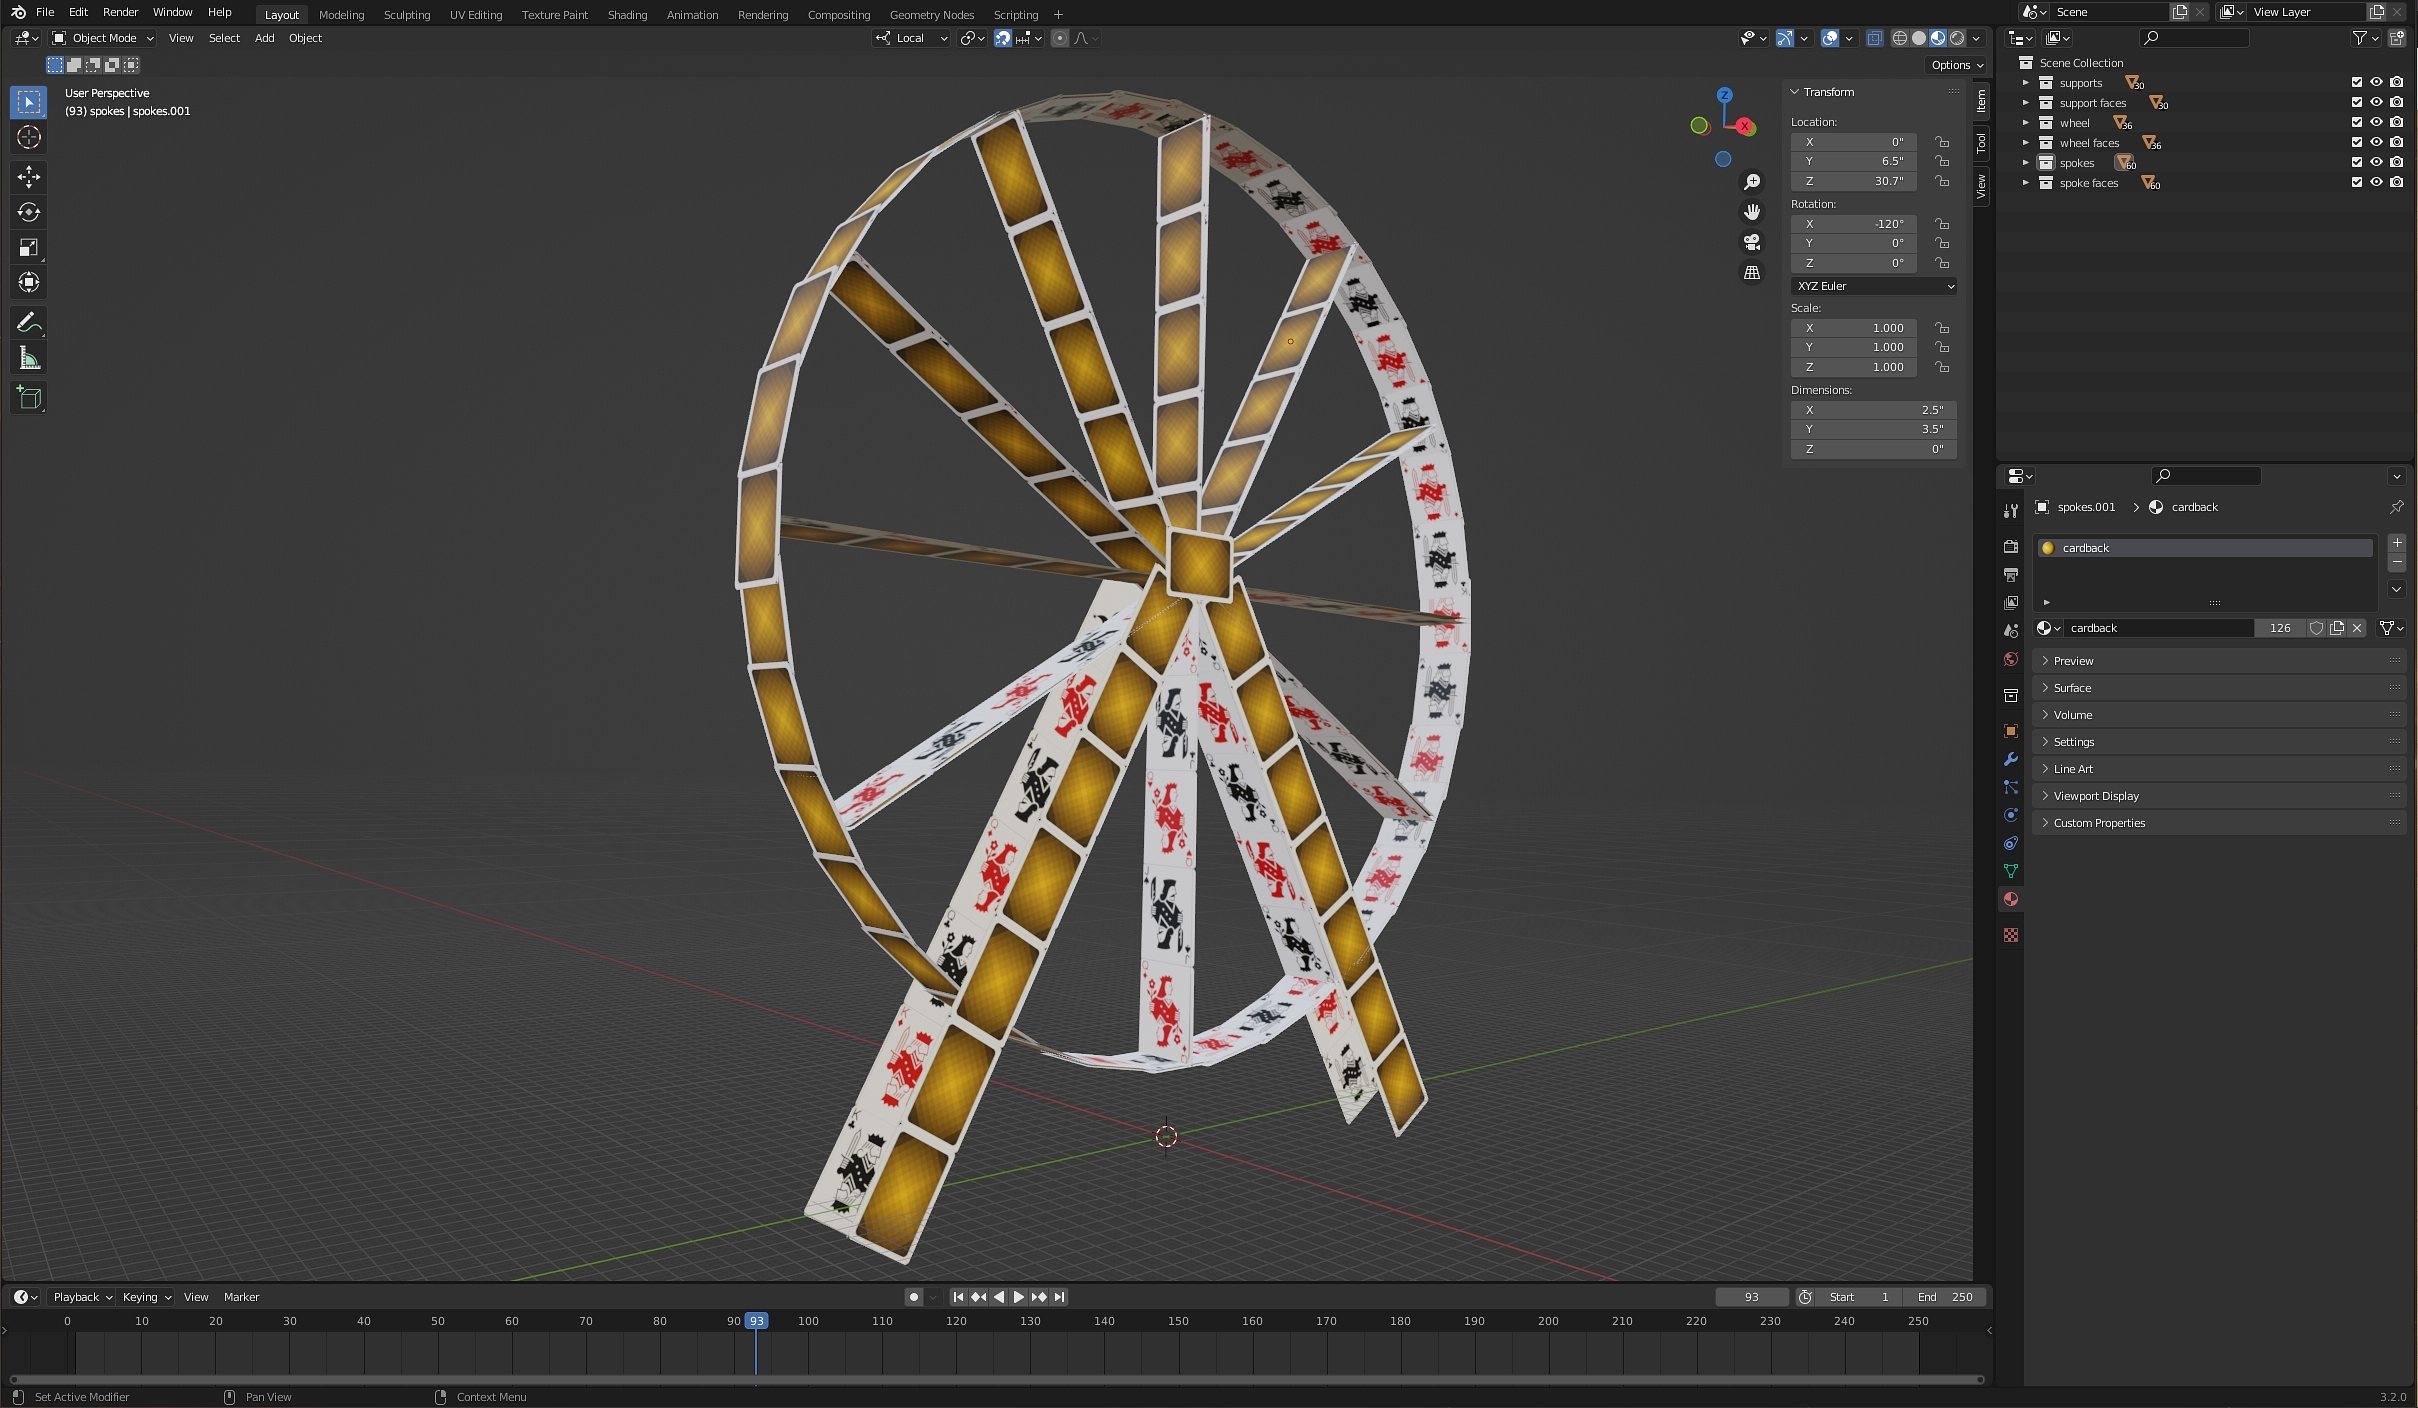 A 3D display of the ferris wheel model in the game.